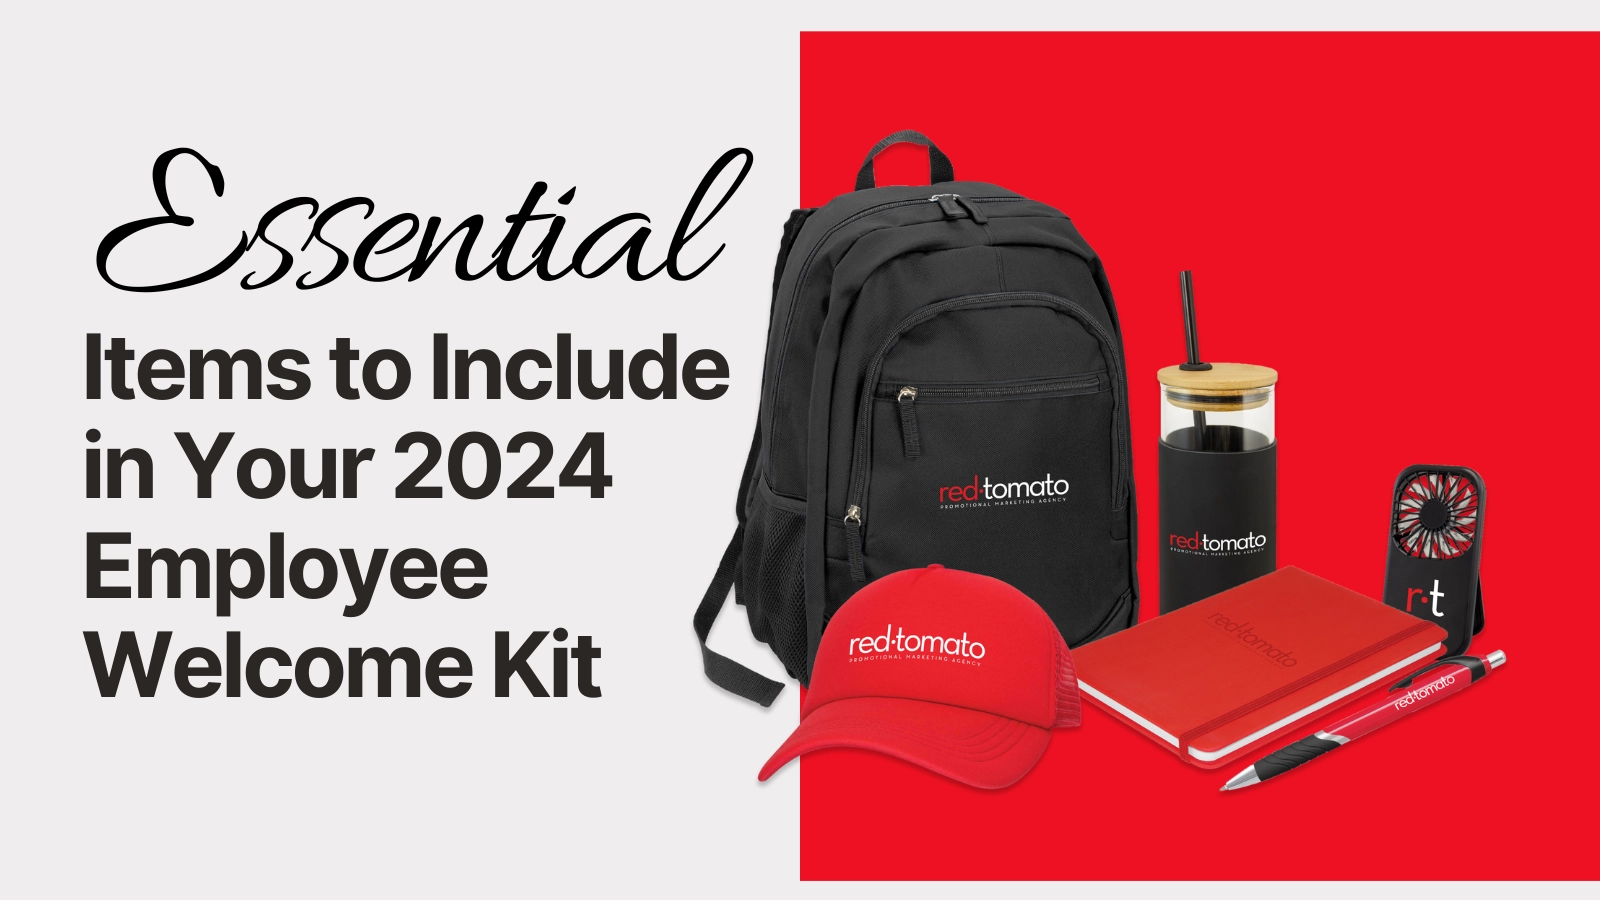 Essential Items to Include in Your 2023 Employee Welcome Kit